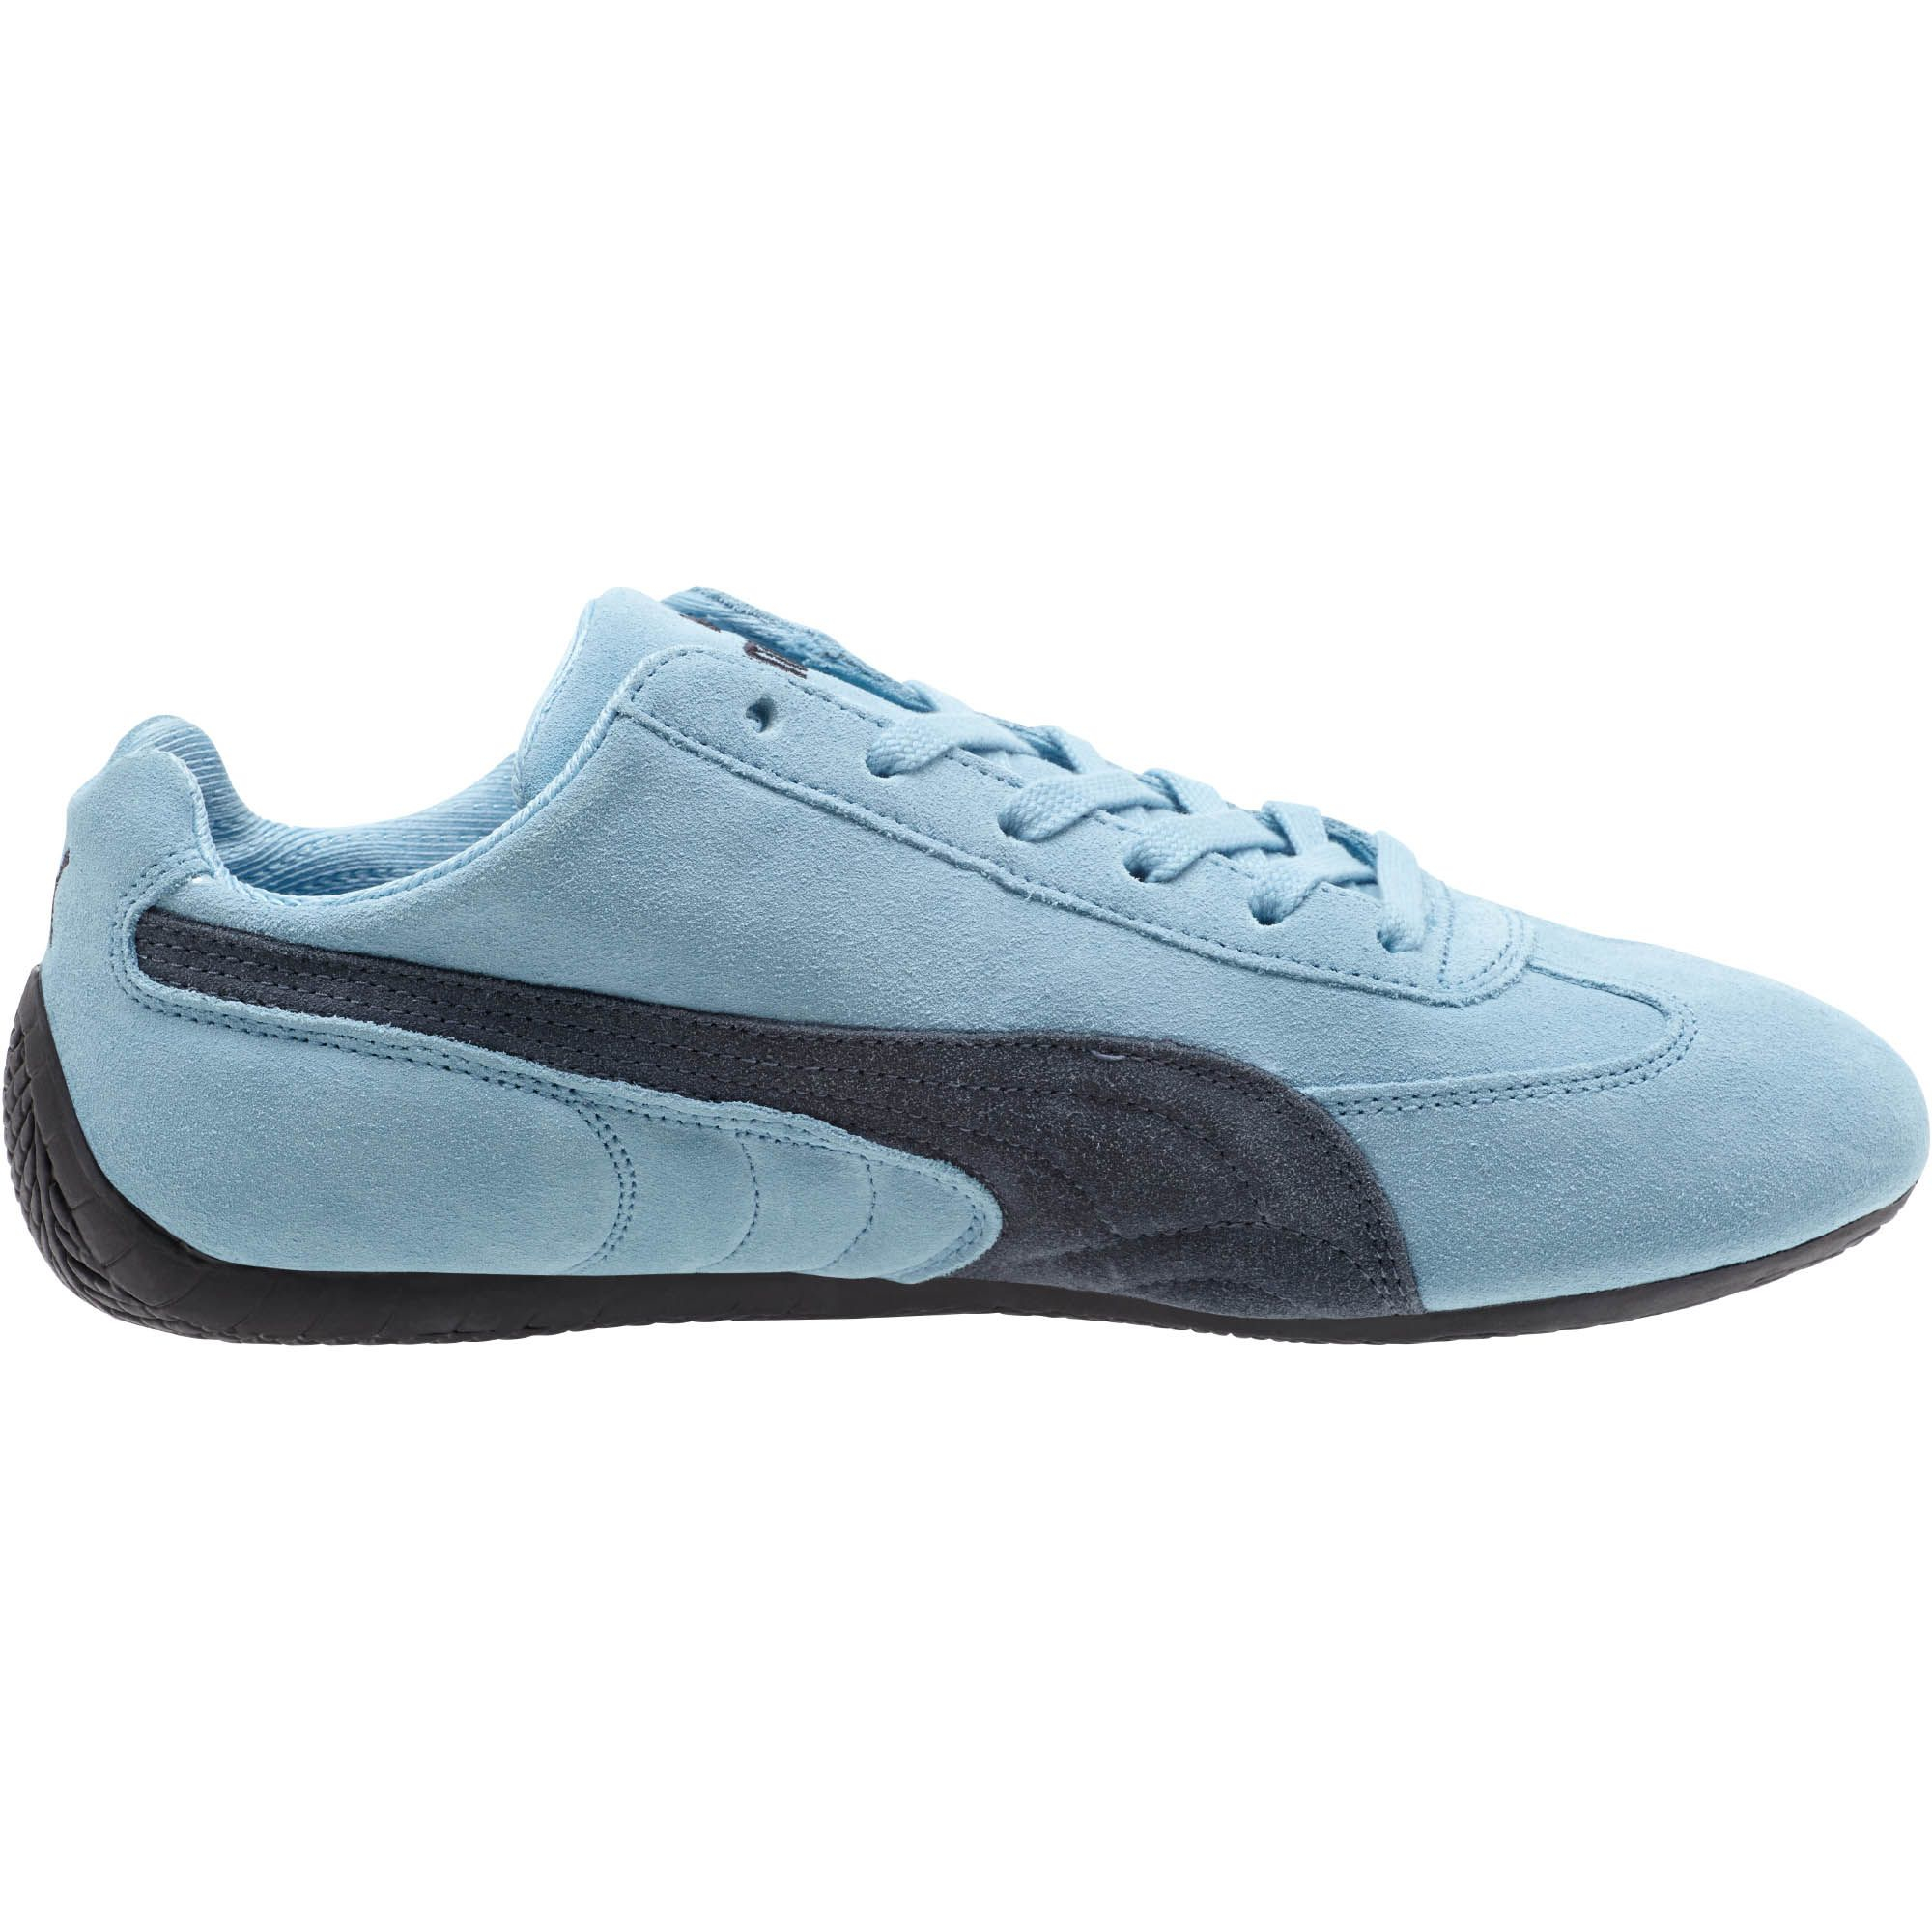 Lyst - PUMA Speed Cat Shoes in Gray for Men